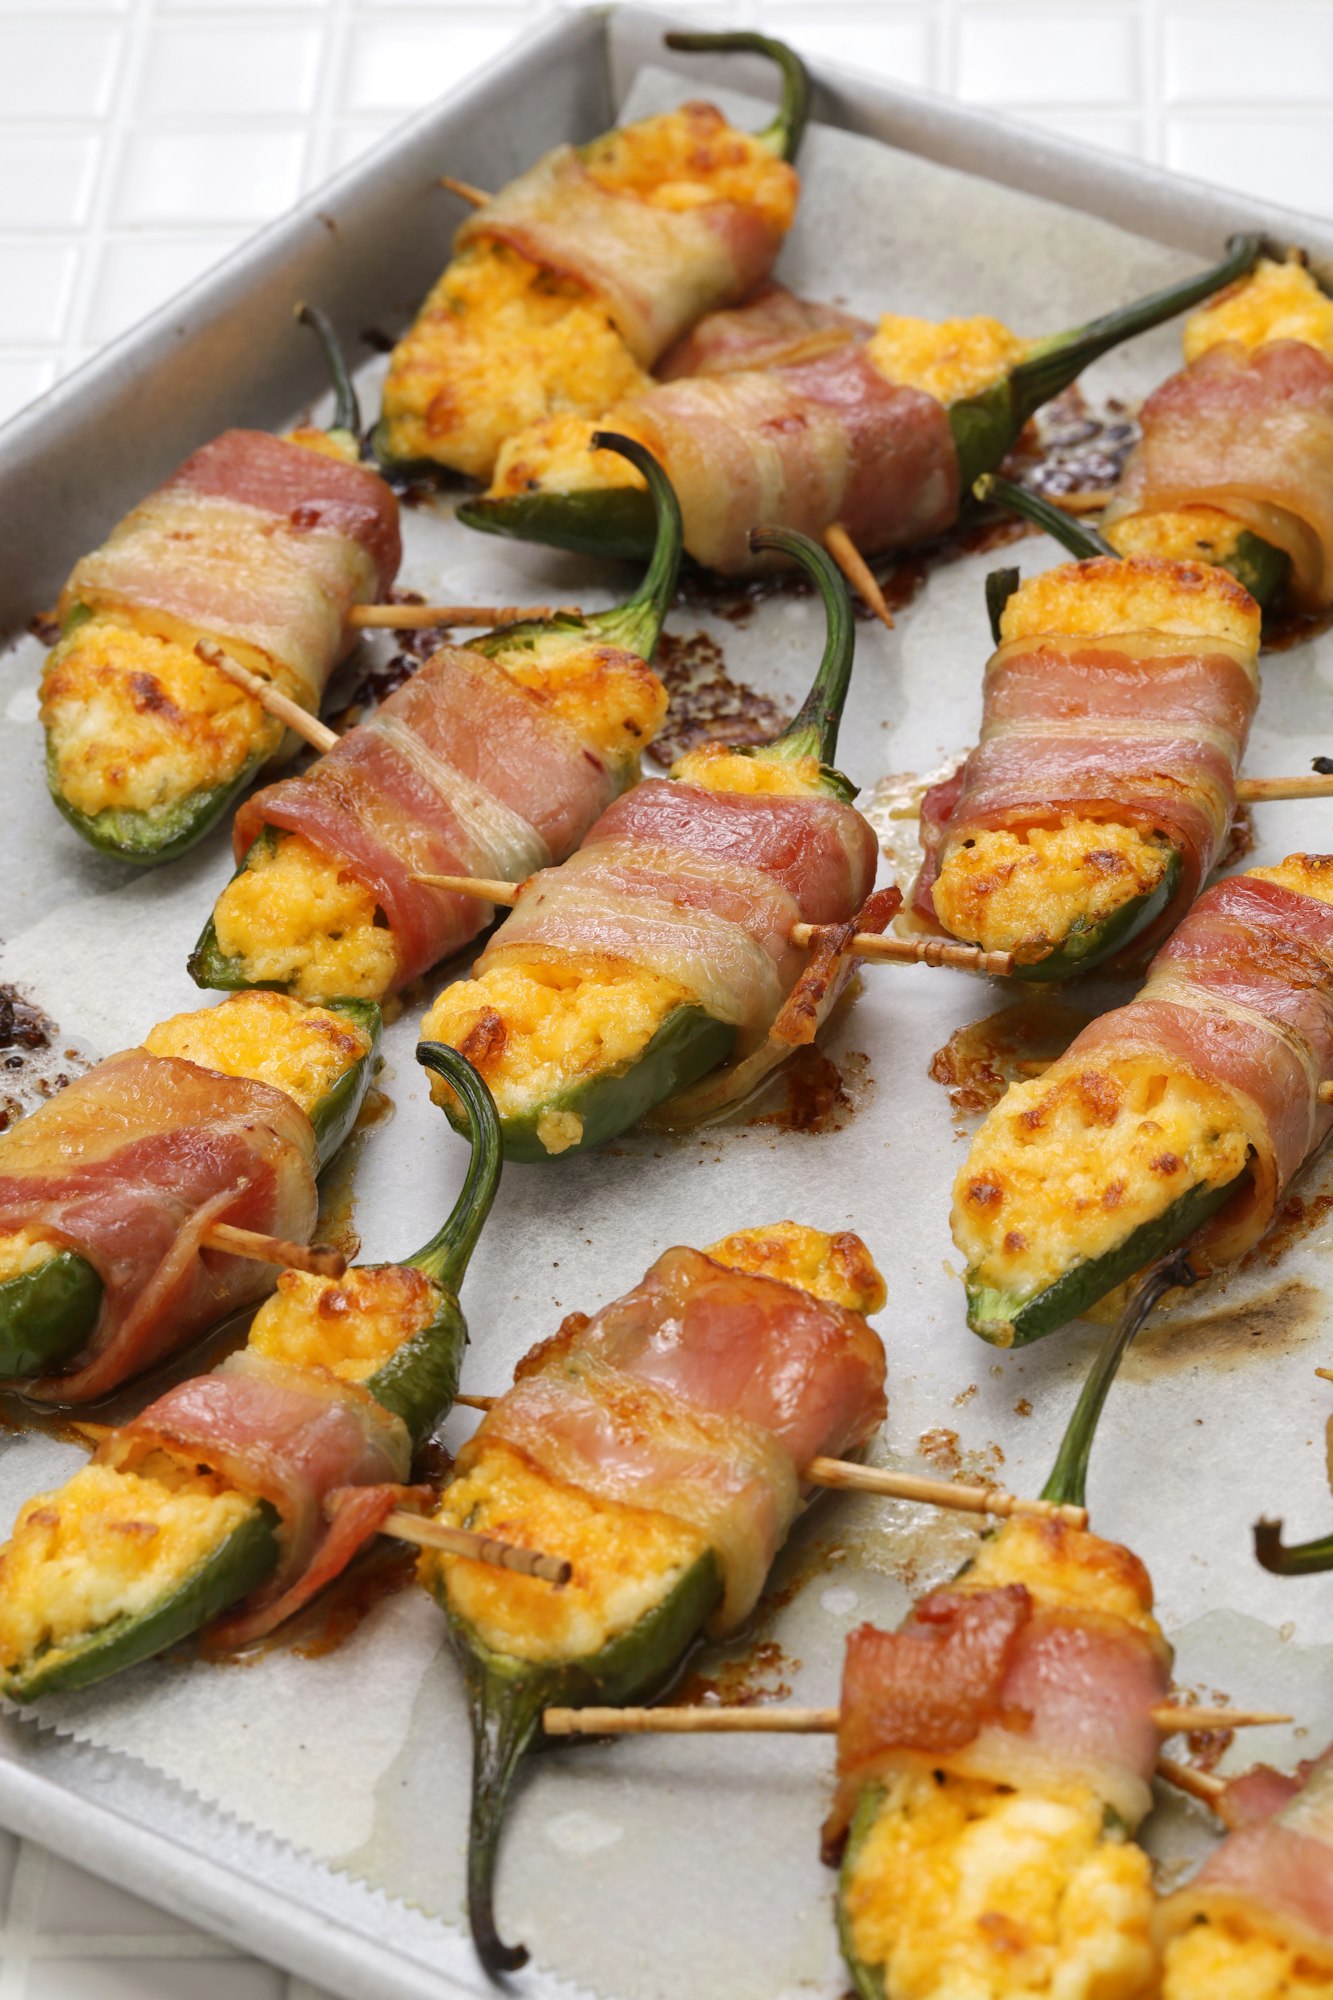 Jalapeno poppers just taken out of the oven.